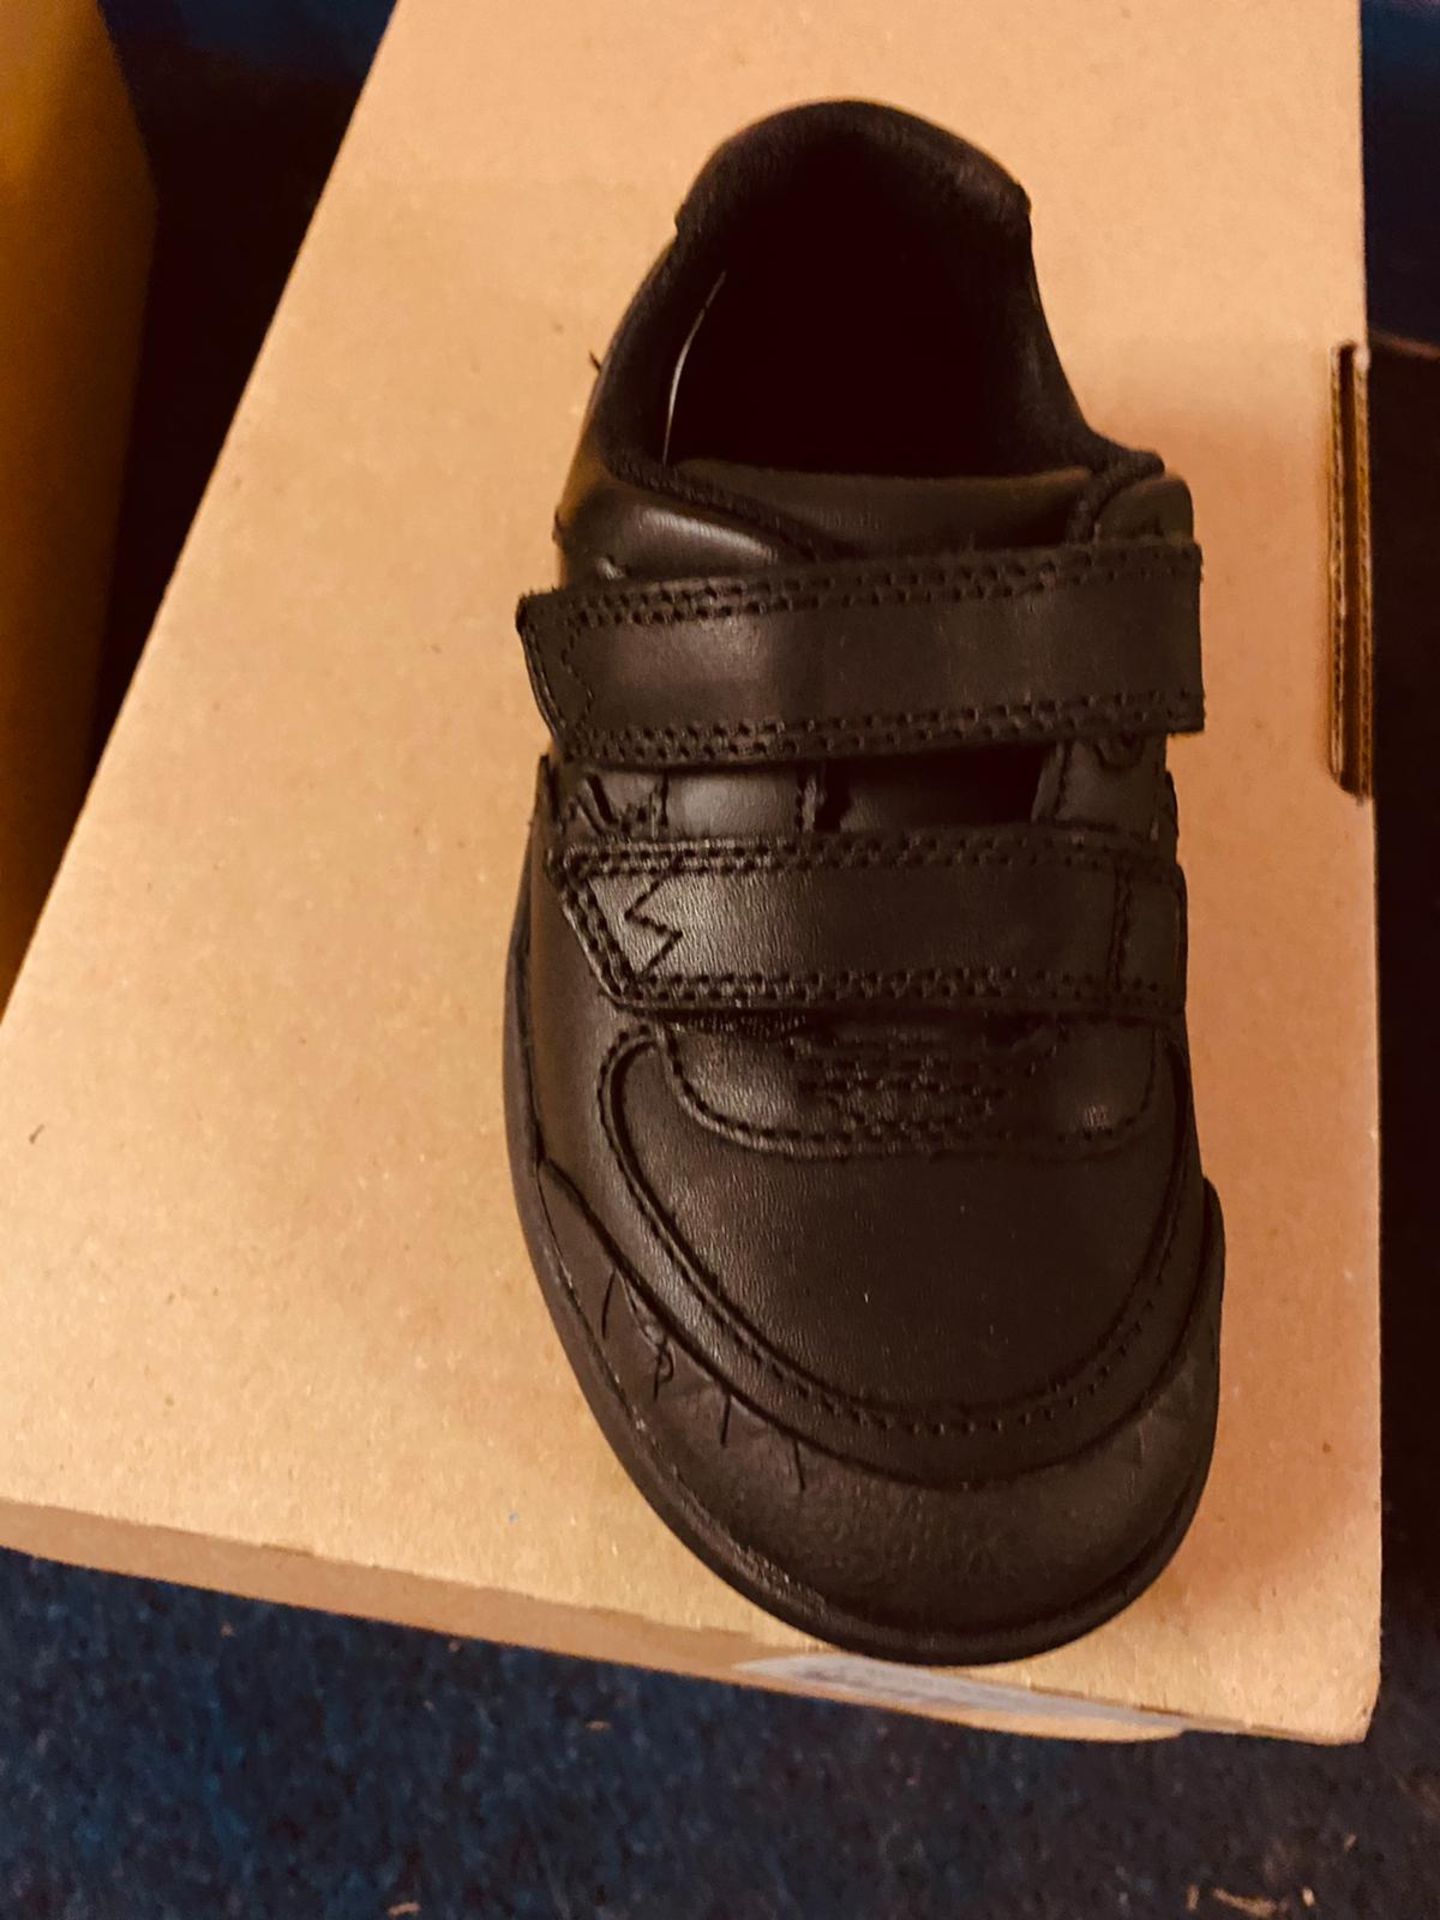 NEW AND BOXED BLACK CLARKS I-7 - Image 2 of 2